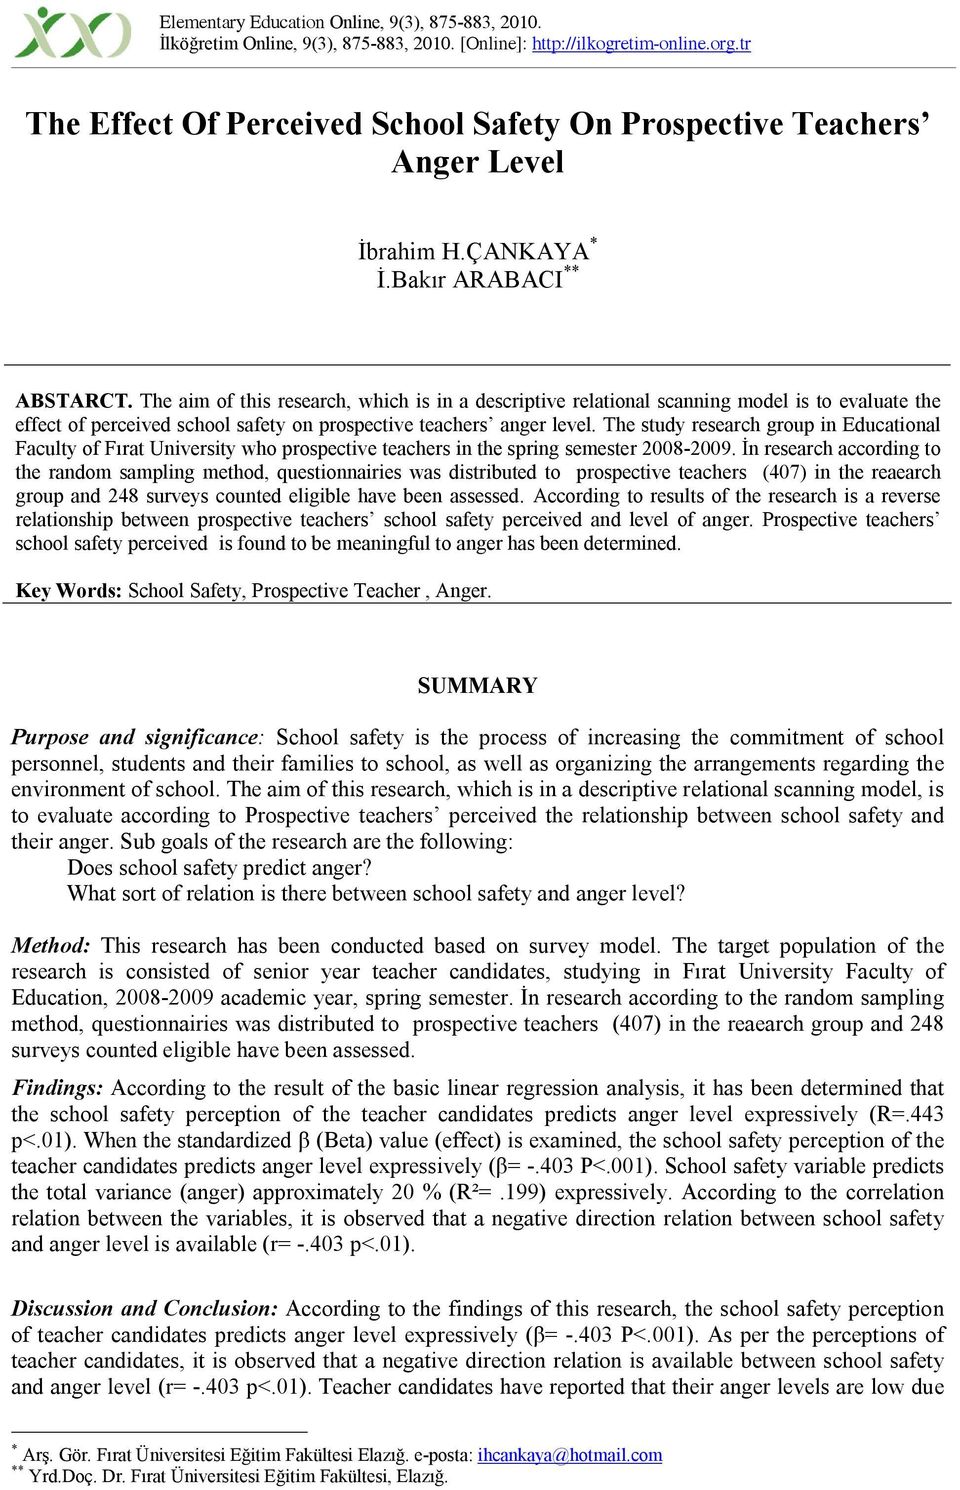 The aim of this research, which is in a descriptive relational scanning model is to evaluate the effect of perceived school safety on prospective teachers anger level.